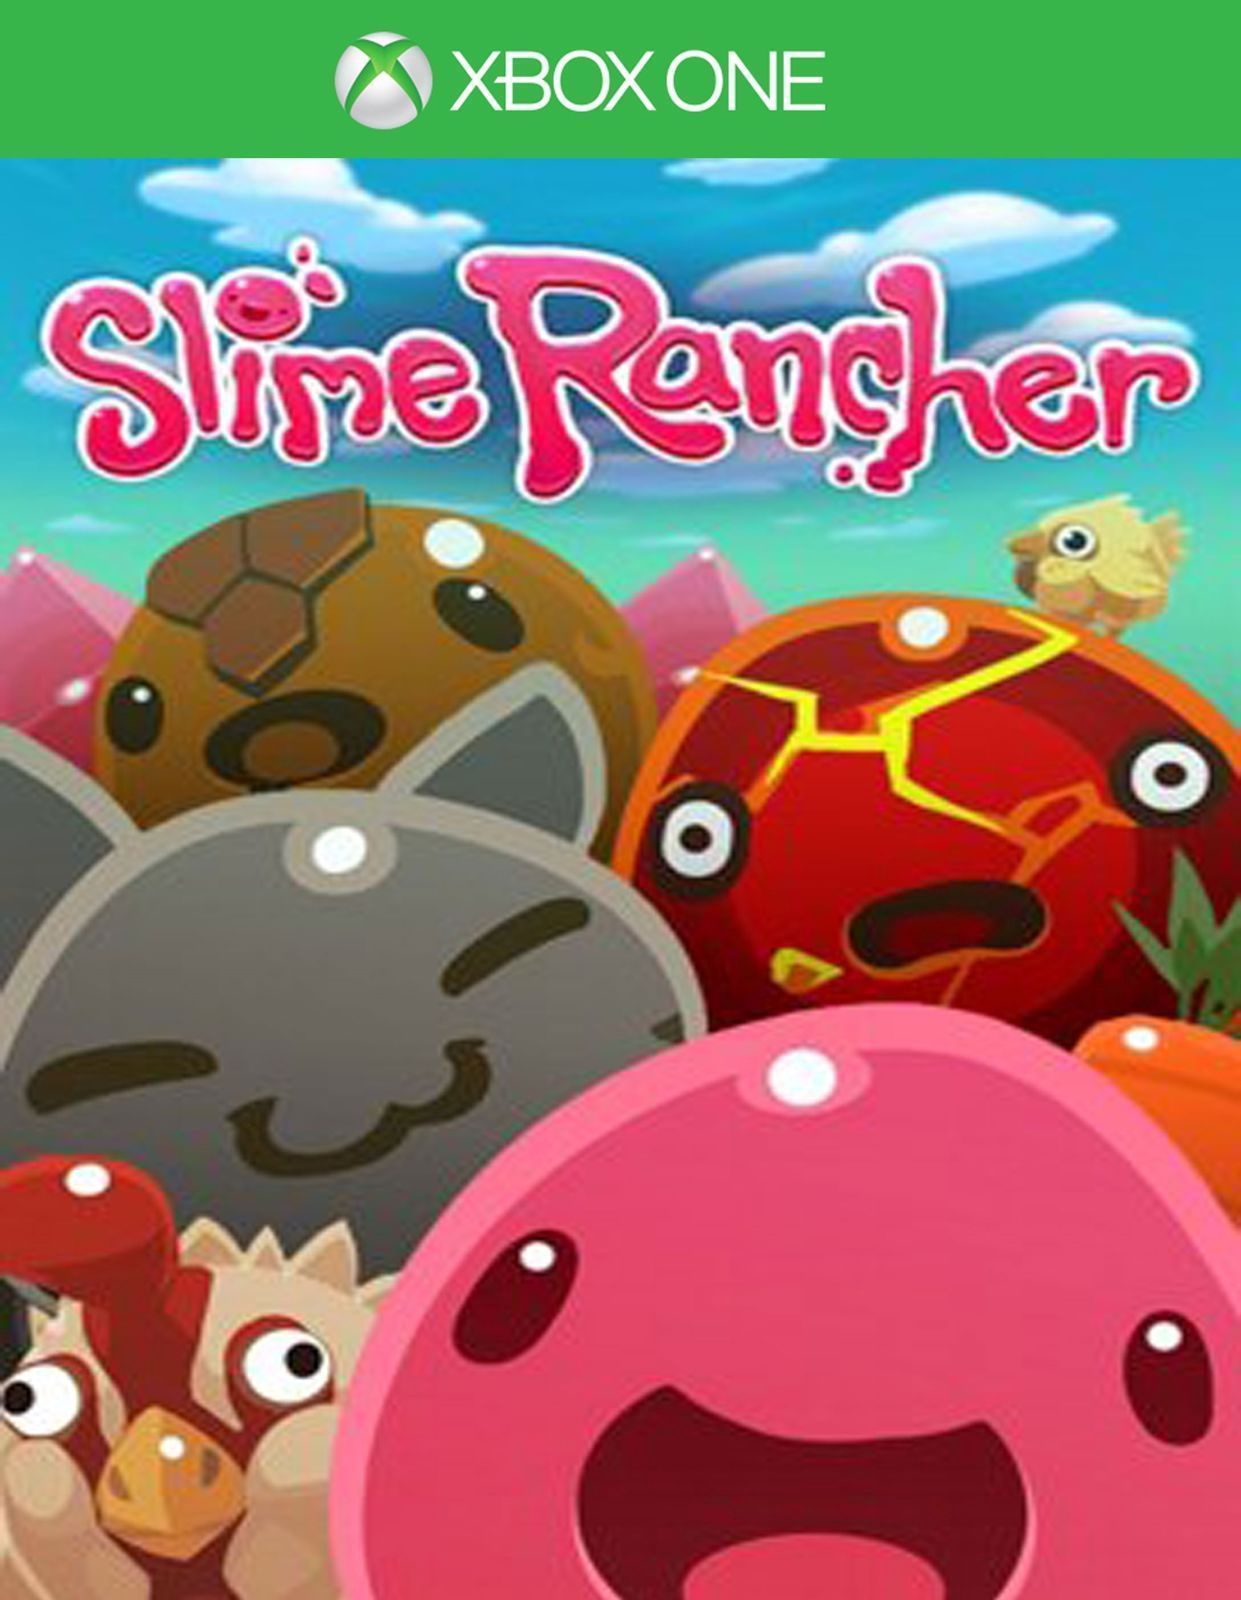 will slime rancher 2 be on xbox one